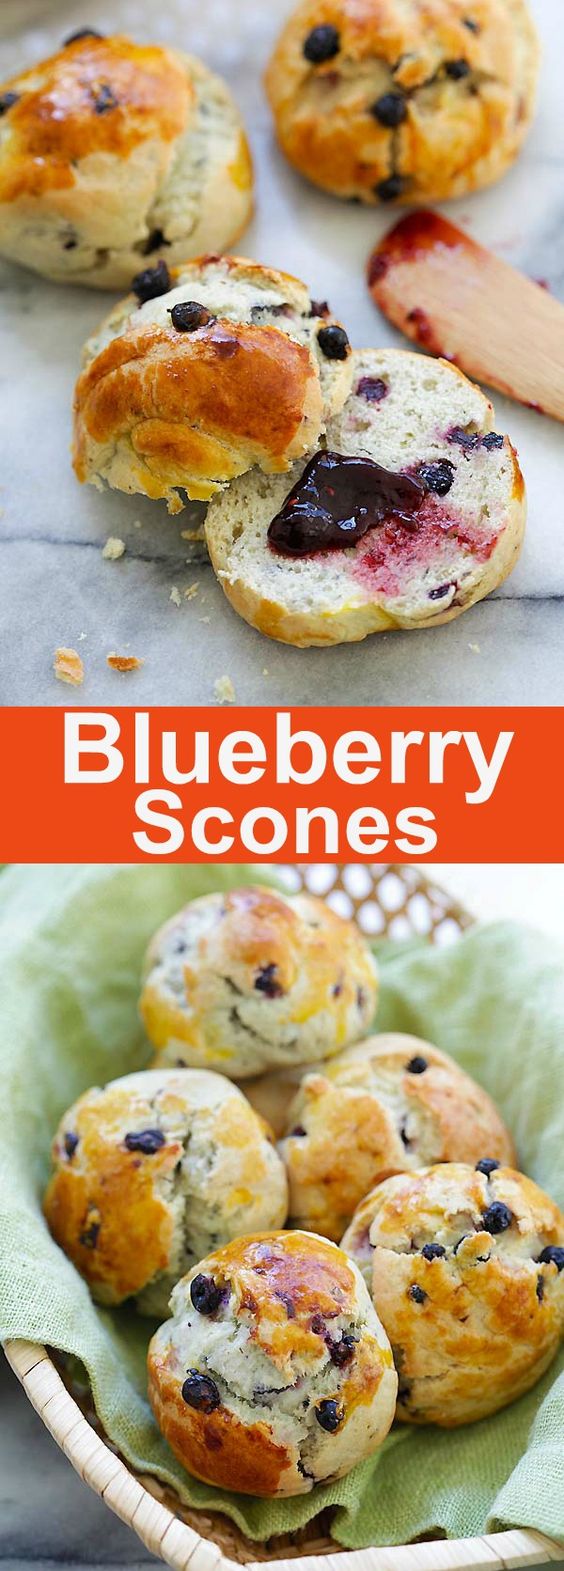 Blueberry Scones – soft, crumbly and sweet homemade scones loaded with fresh blueberries. Perfect as afternoon tea with a cup of tea or coffee | rasamalaysia.com